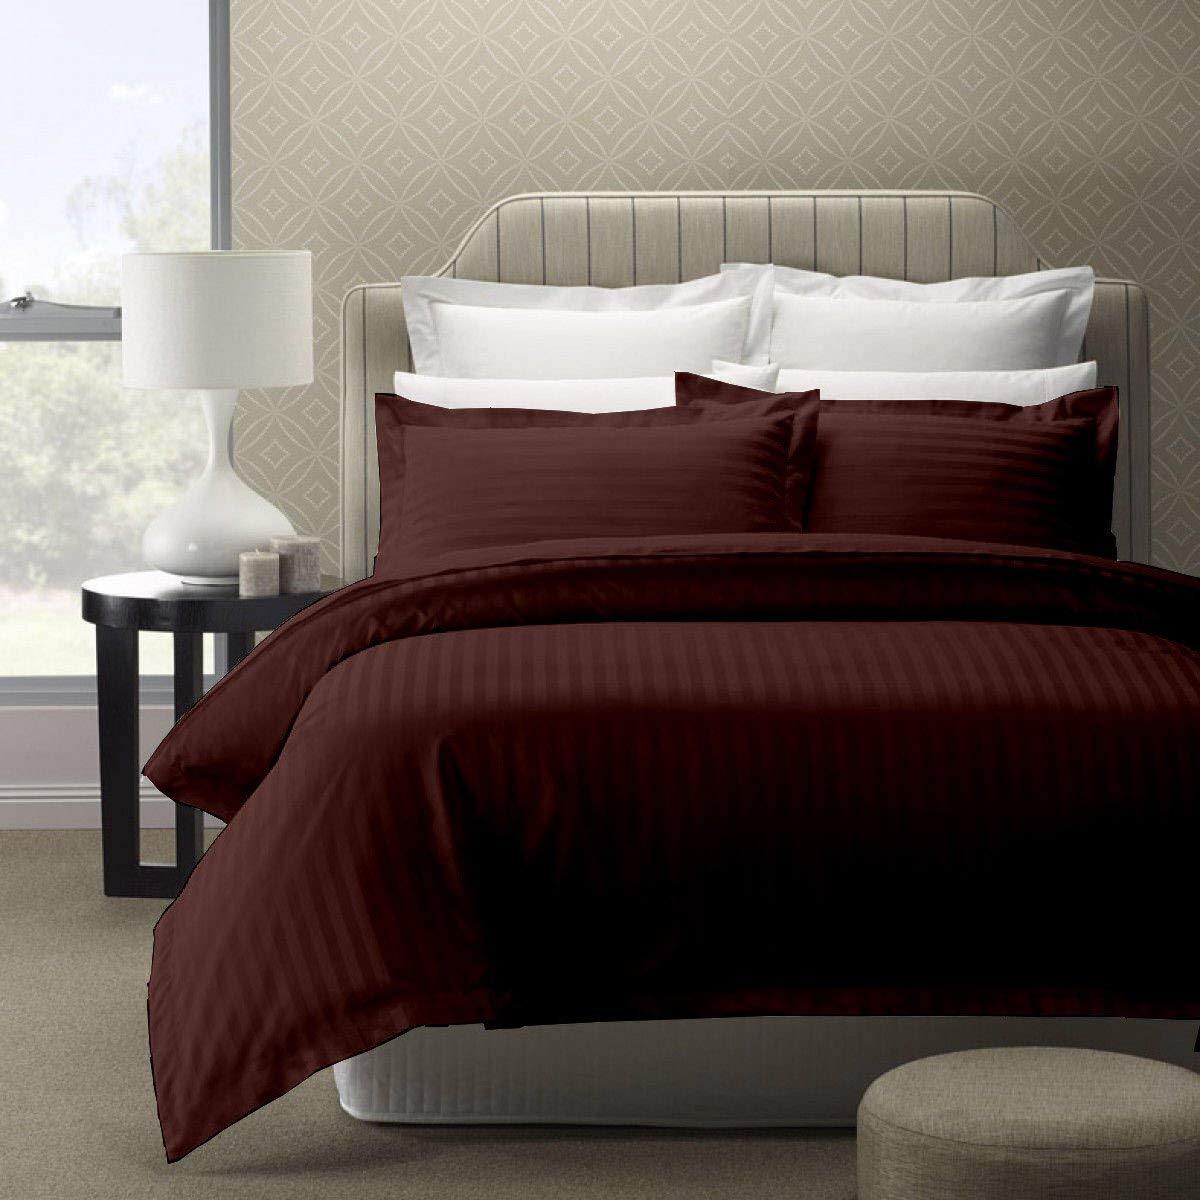 Which fabric is best for bed sheets